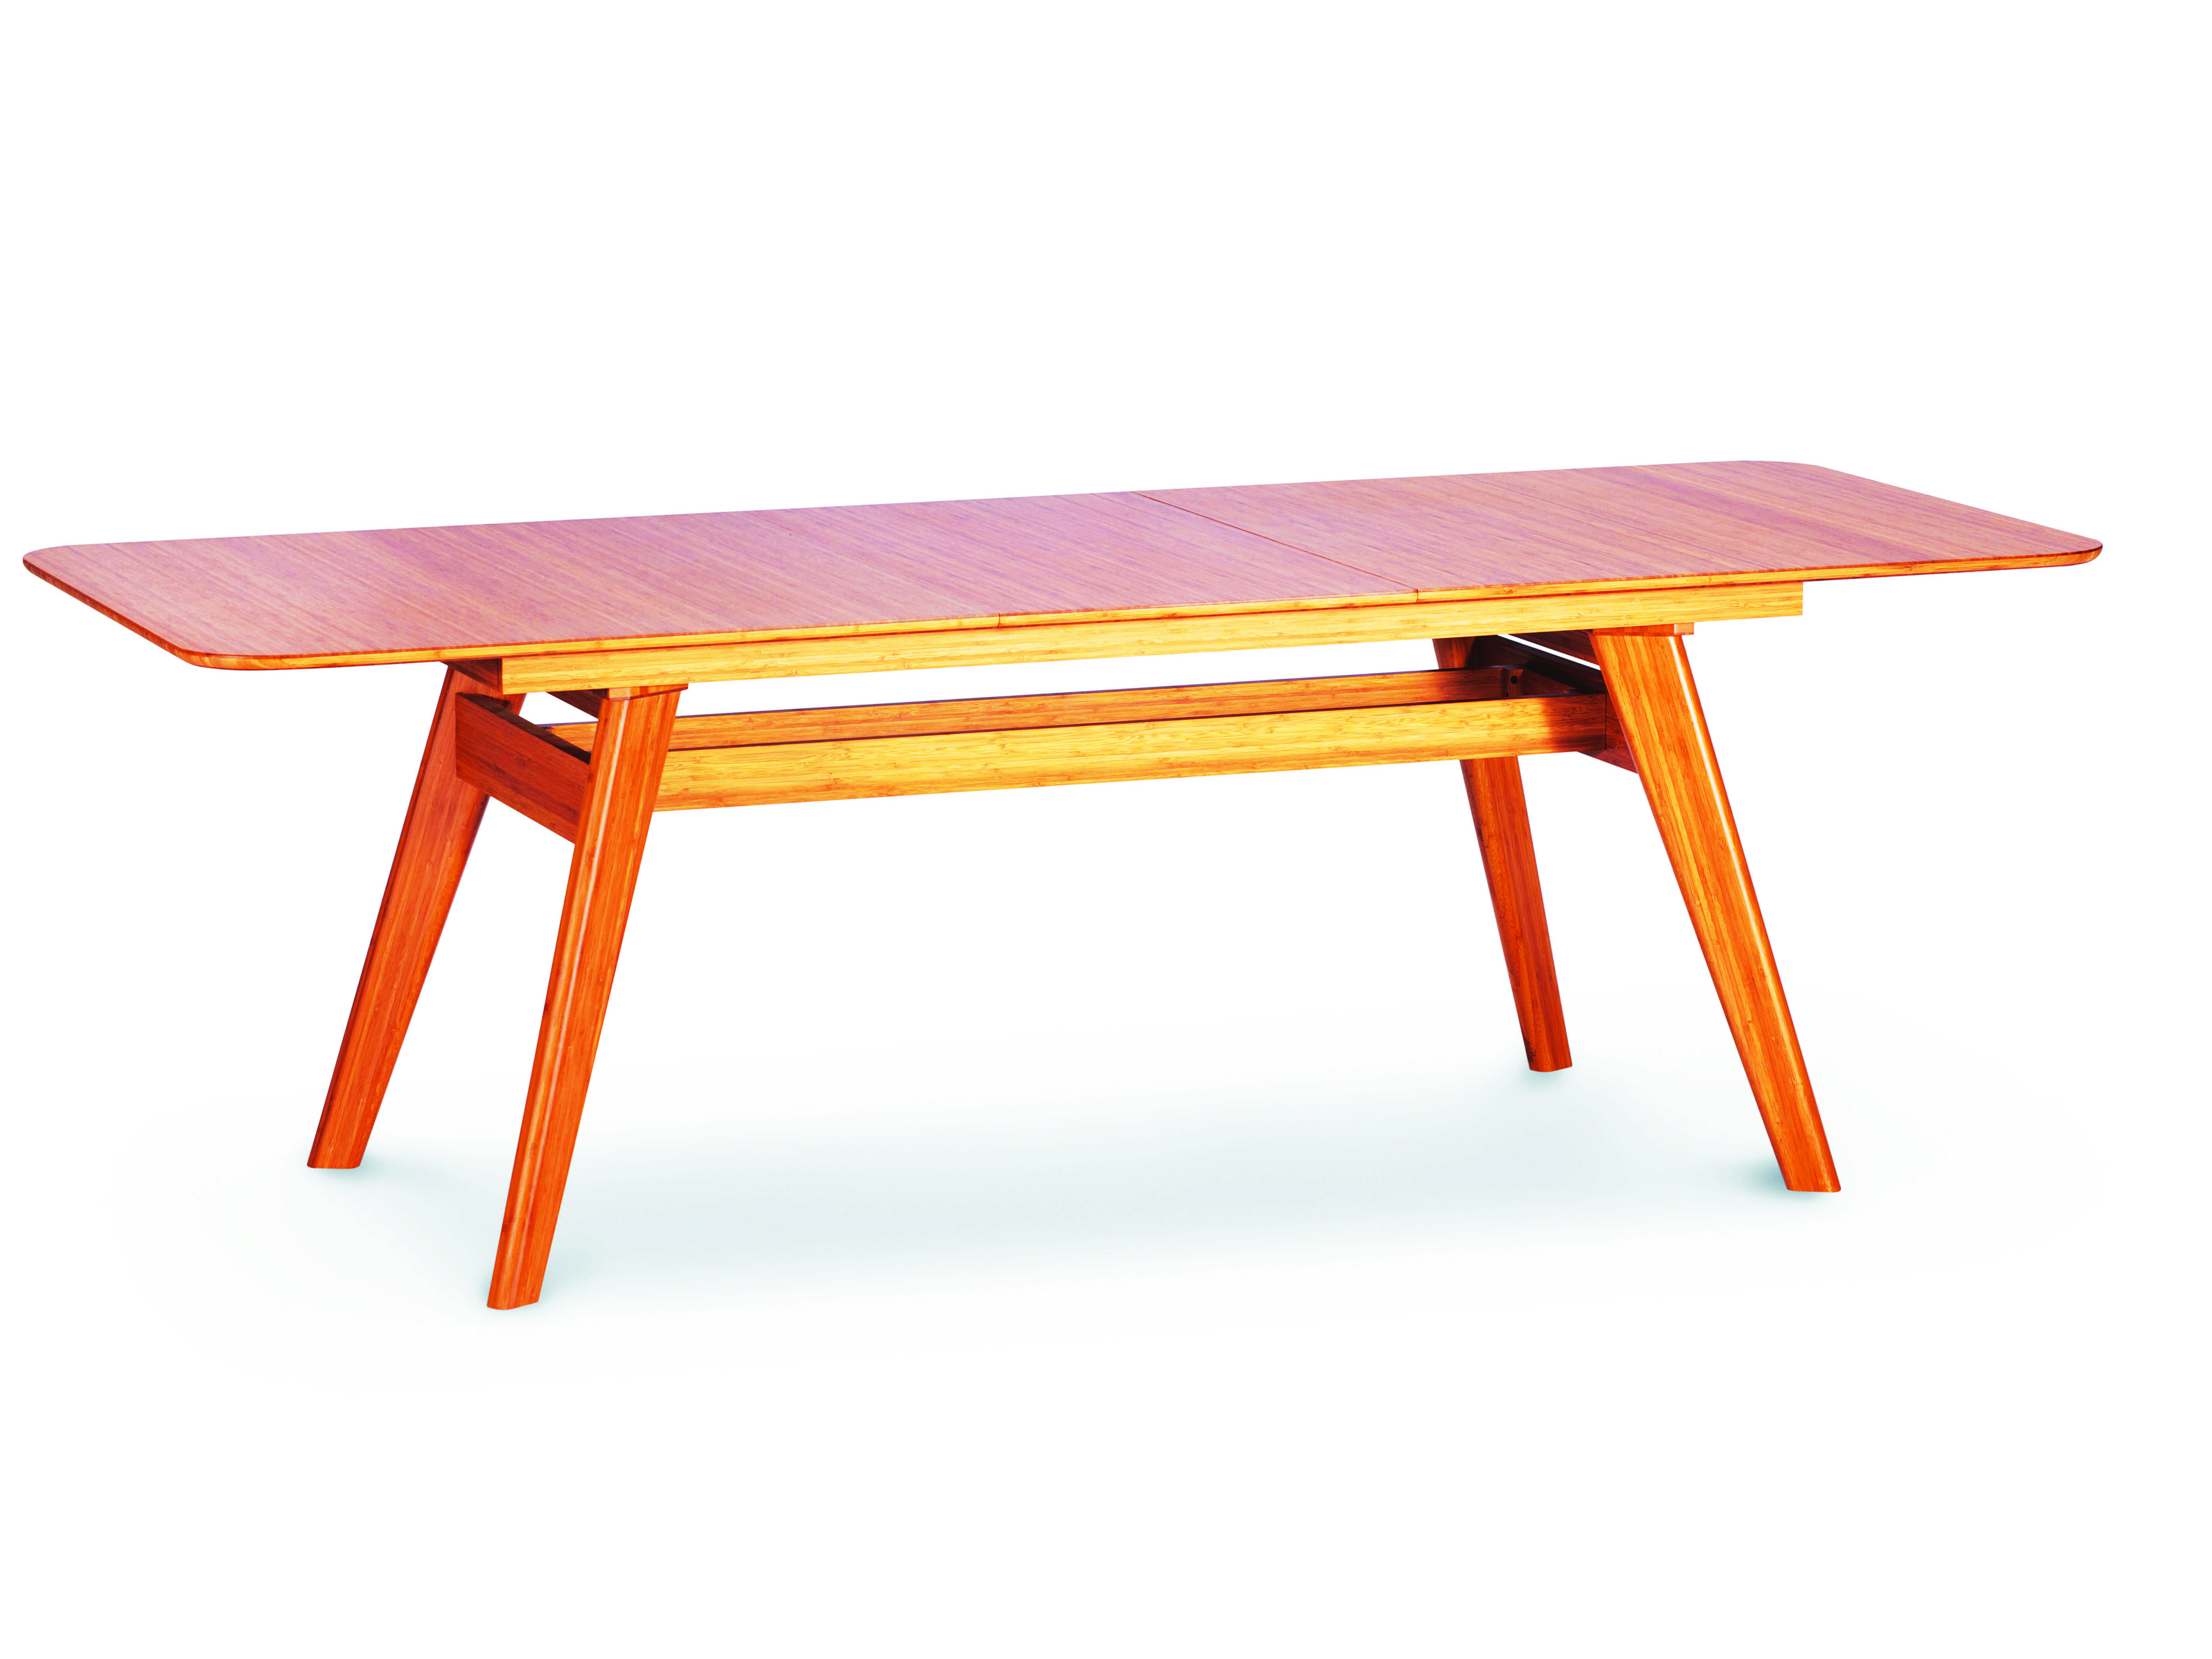 36 Inch Dining Room Table Sunsport